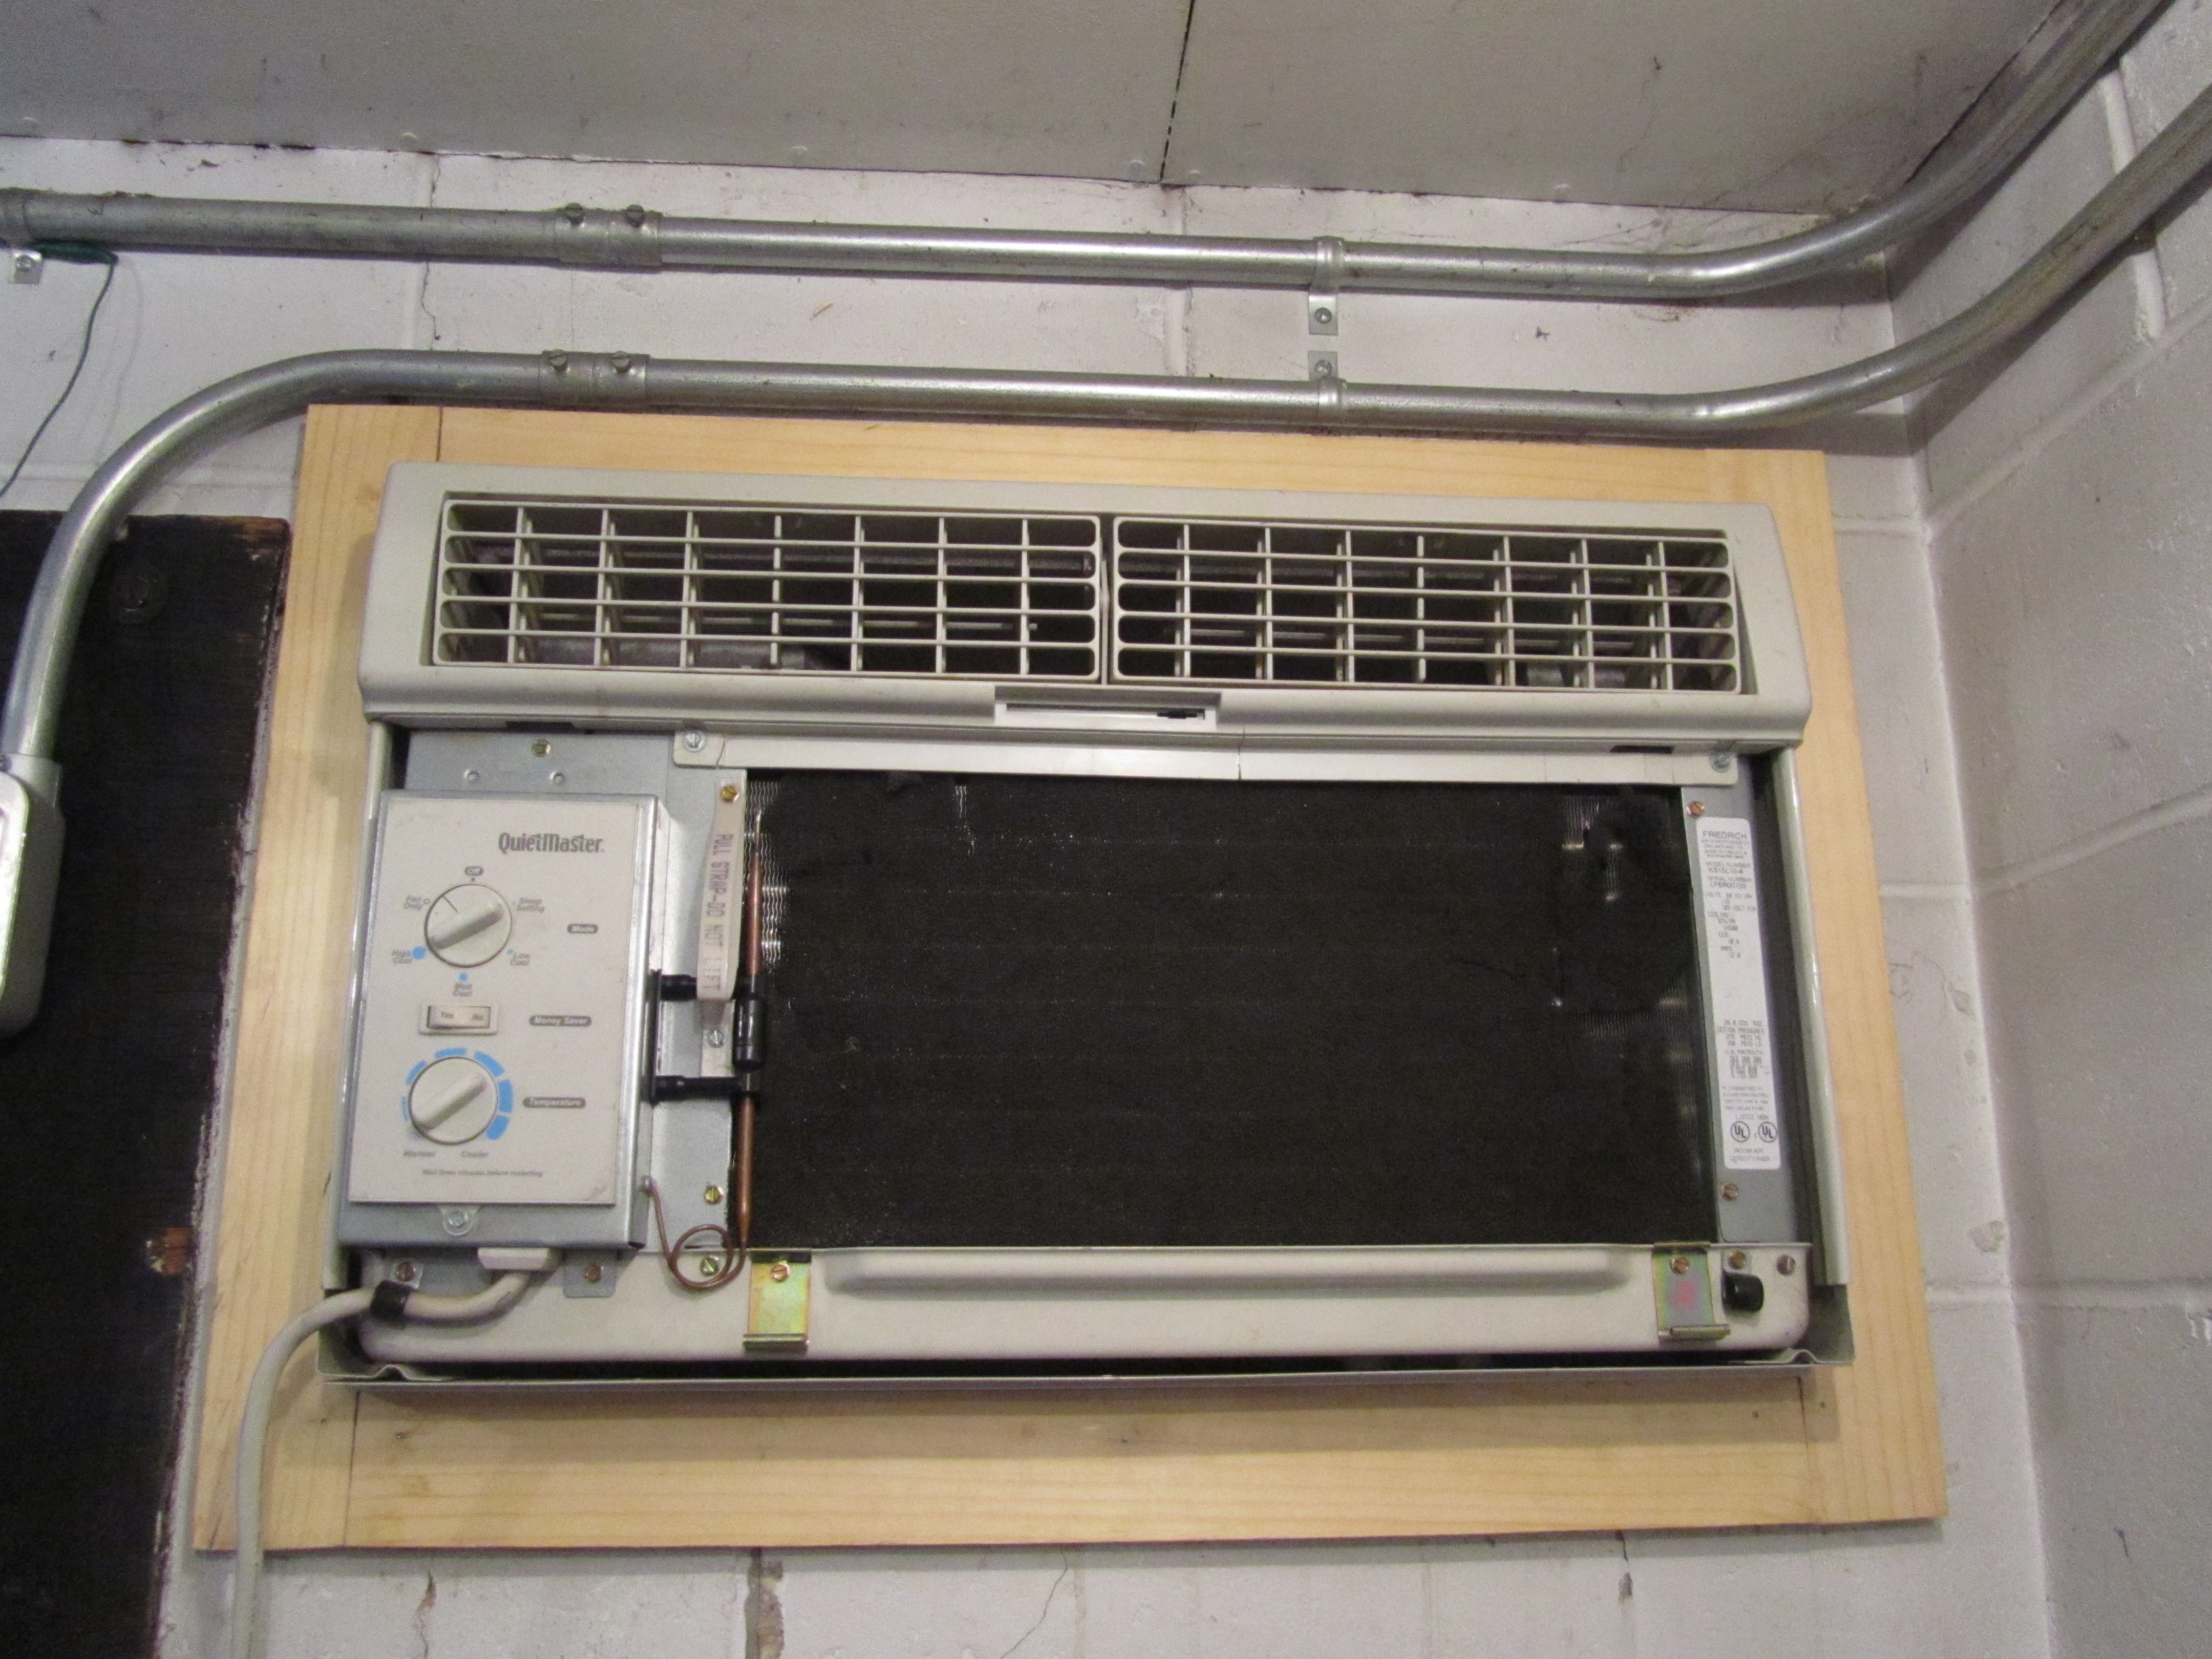 2010 - Our too small Air Conditioner. The building alway over heated in the summer, until WRSU got a additional 33,000 BTU unit